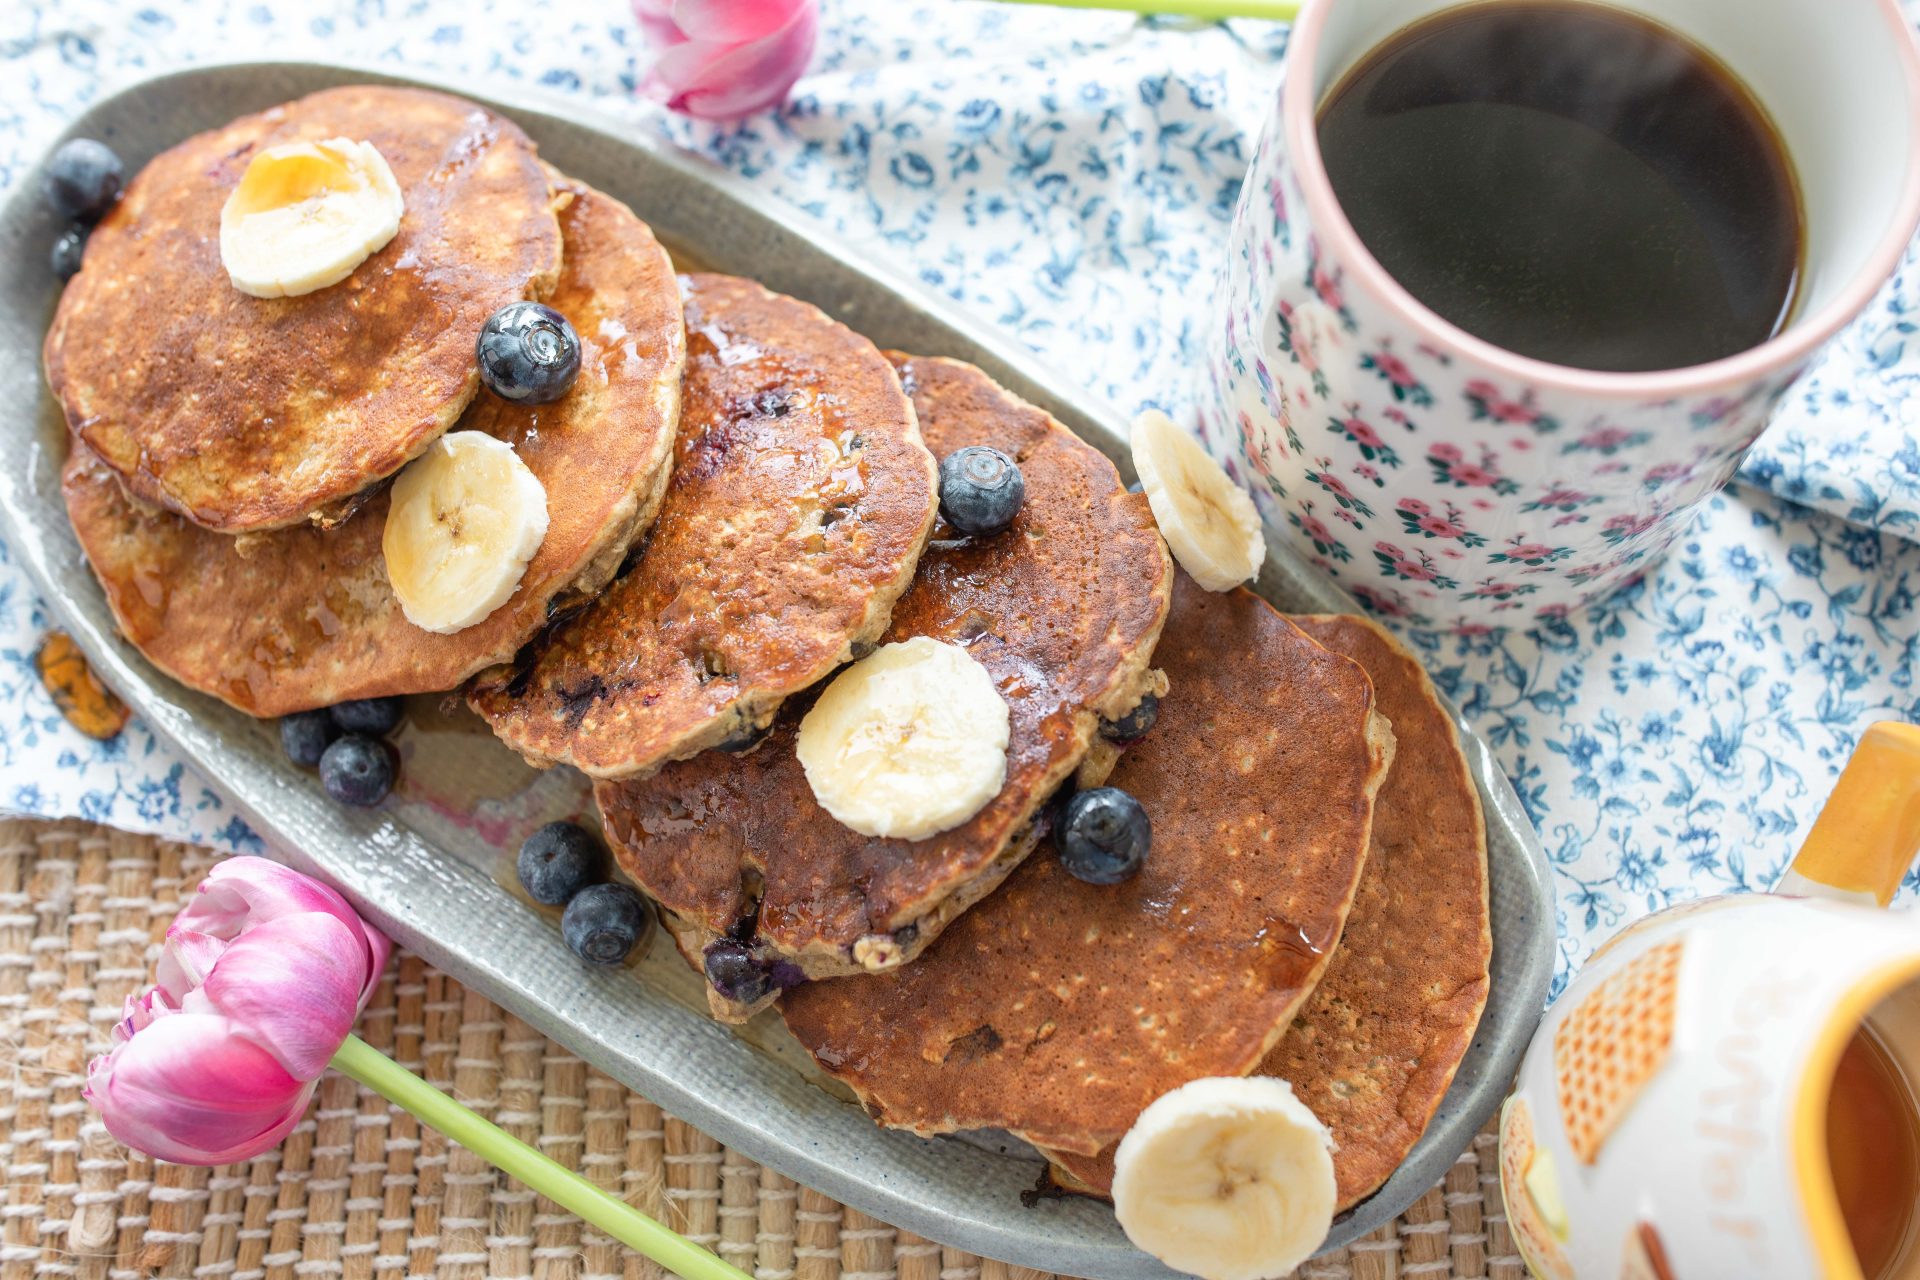 oatmeal pancakes, healthy pancakes, healthy breakfast, what to have for breakfast, gluten free, dairy free, protein packed, blueberry, banana, plant based protein powder, almond milk, kid-friendly, good food, meal prep, how to make protein oat pancakes, macros